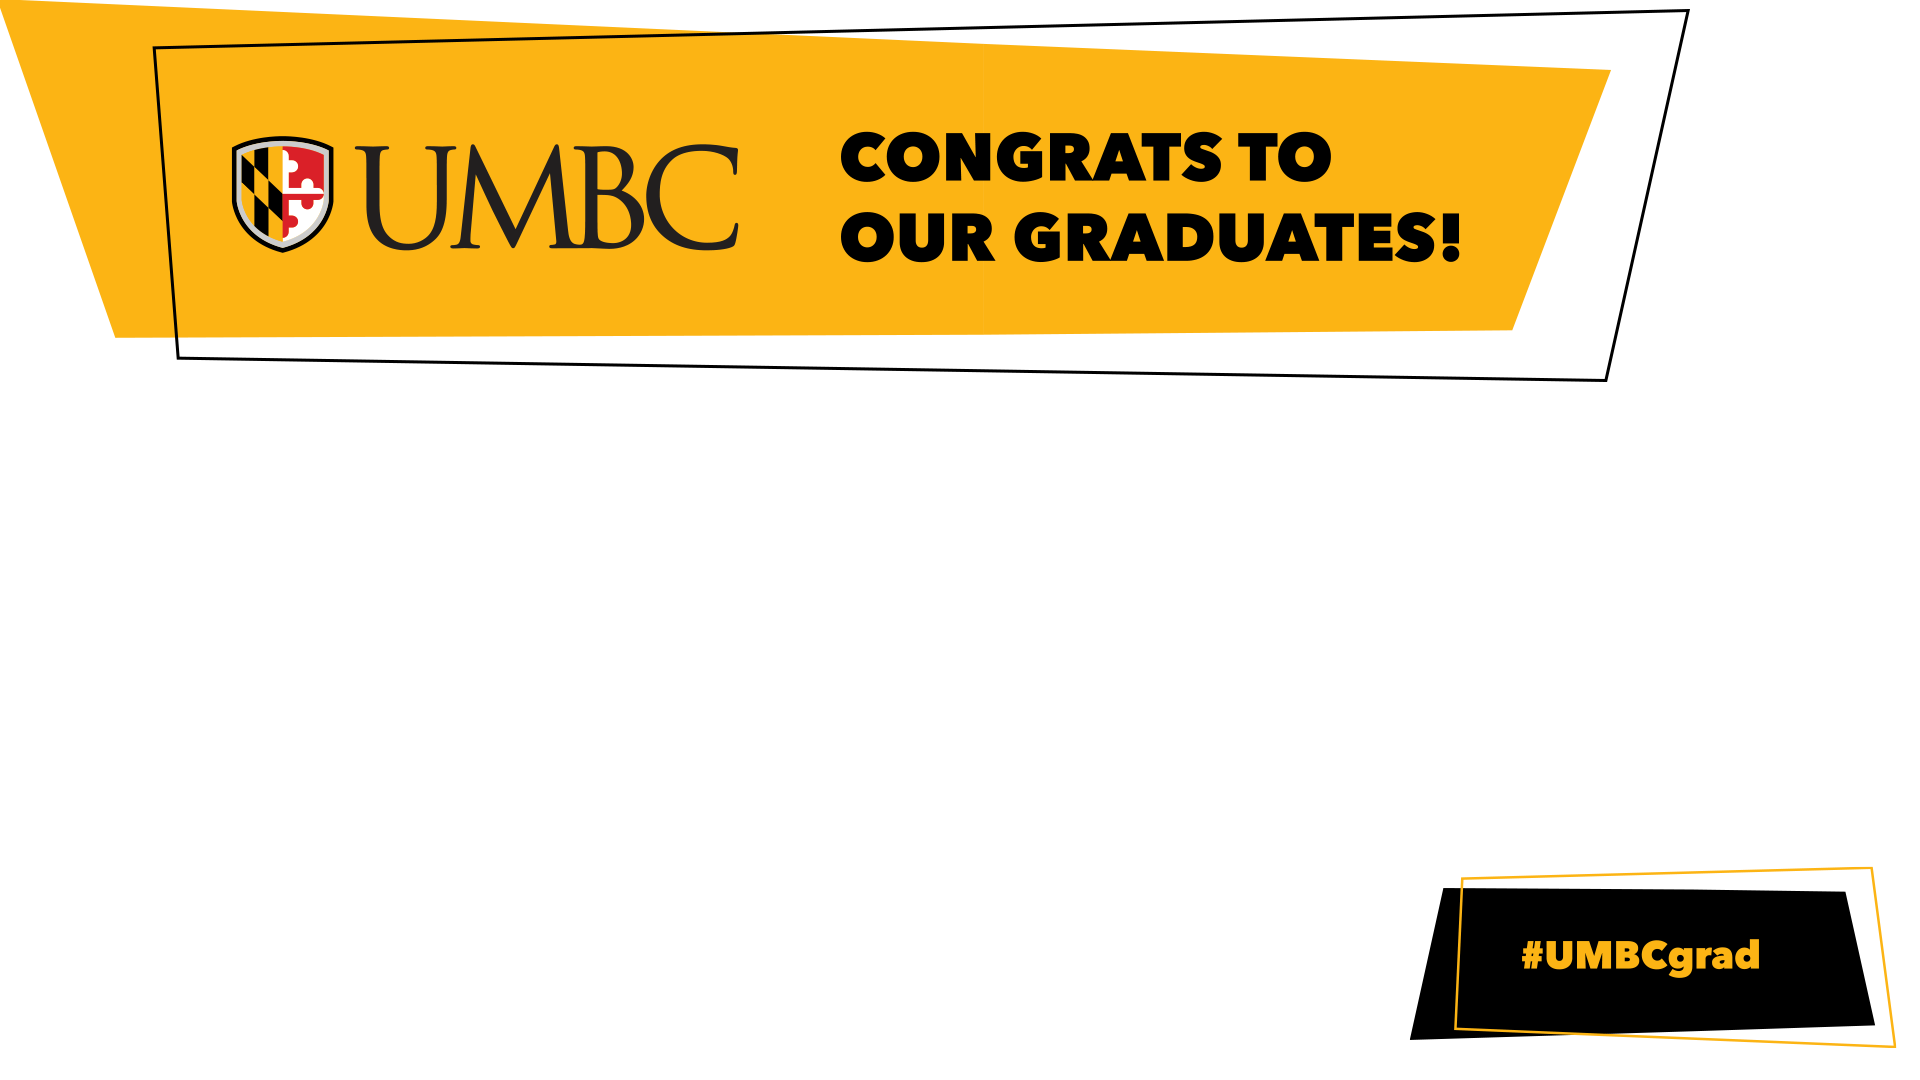 Landscape picture overlay with gold banner at top with UMBC logo and Congrats to Our Grads in black text and black banner with #UMBCGrad in gold text in lower right corner.